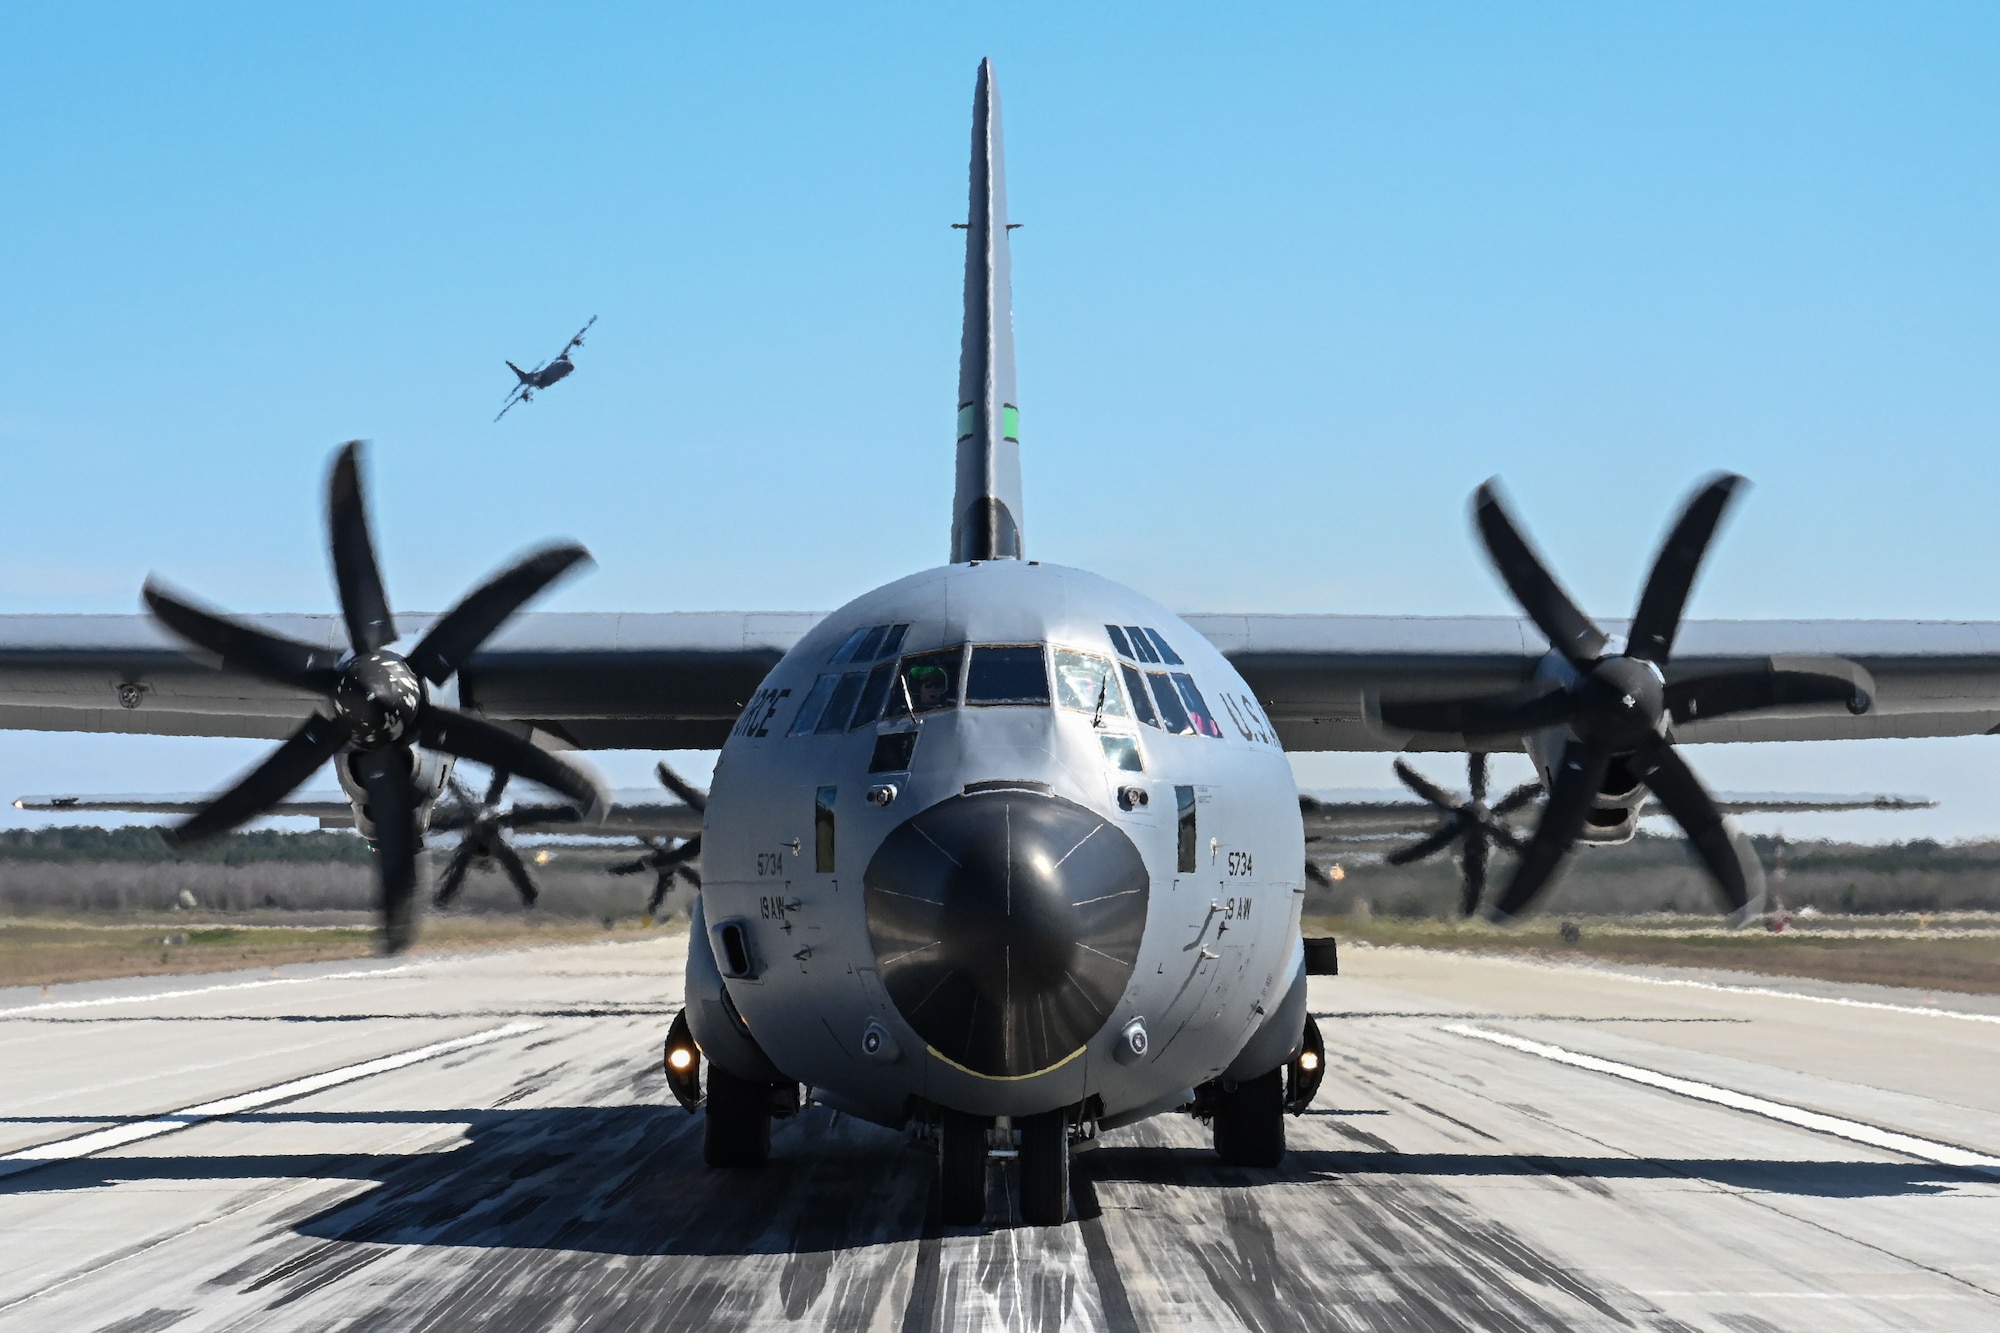 A C-130 sits on the flgihtline.